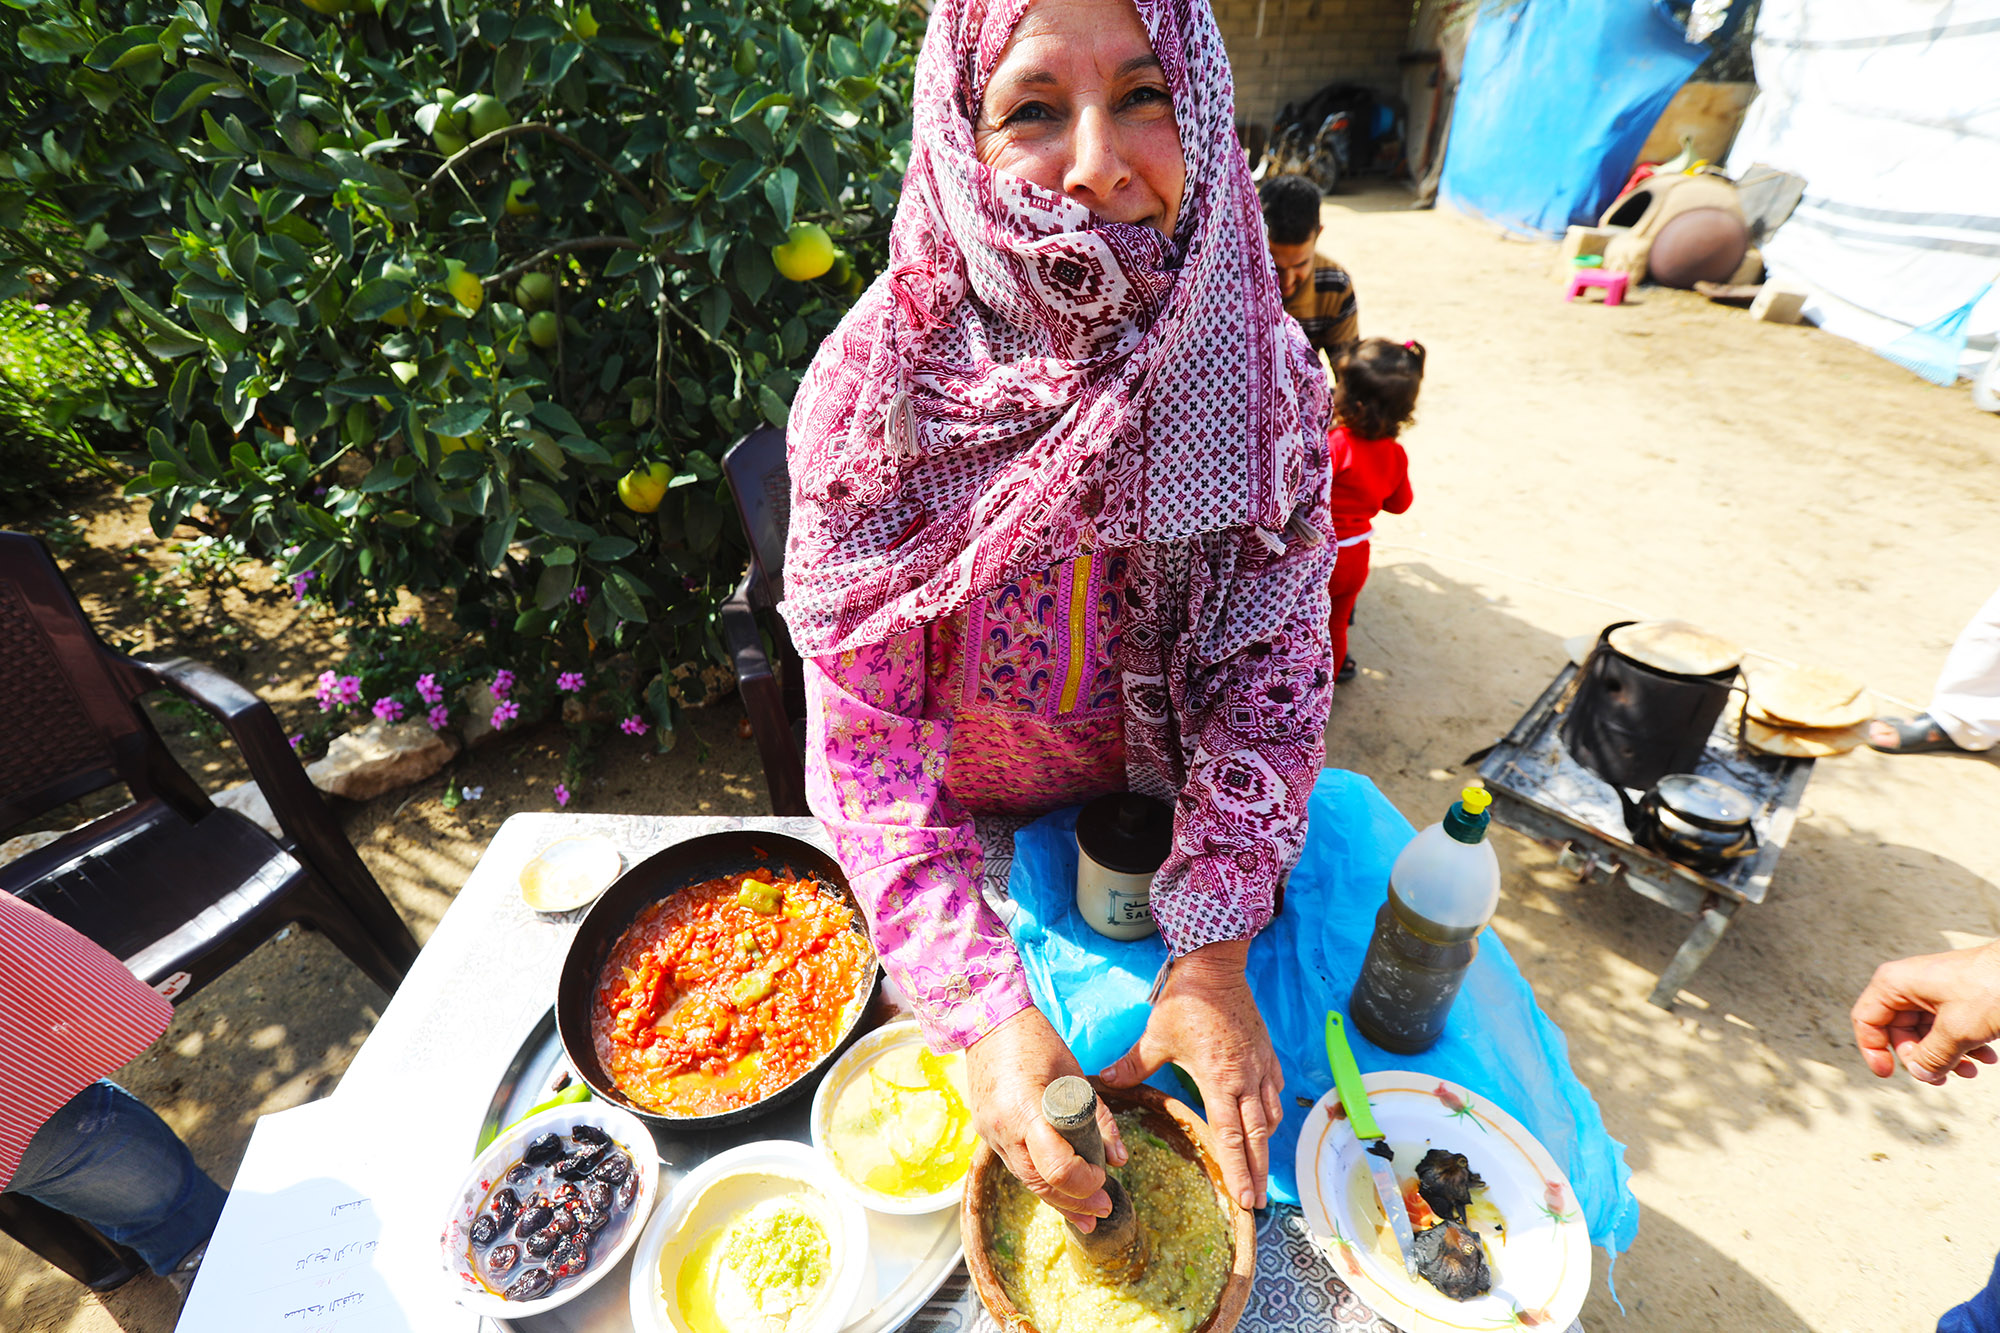 Wael’s mother, Samira prepares a meal of fried tomatoes, baba ghanouj and cucumber salad from their first harvest.